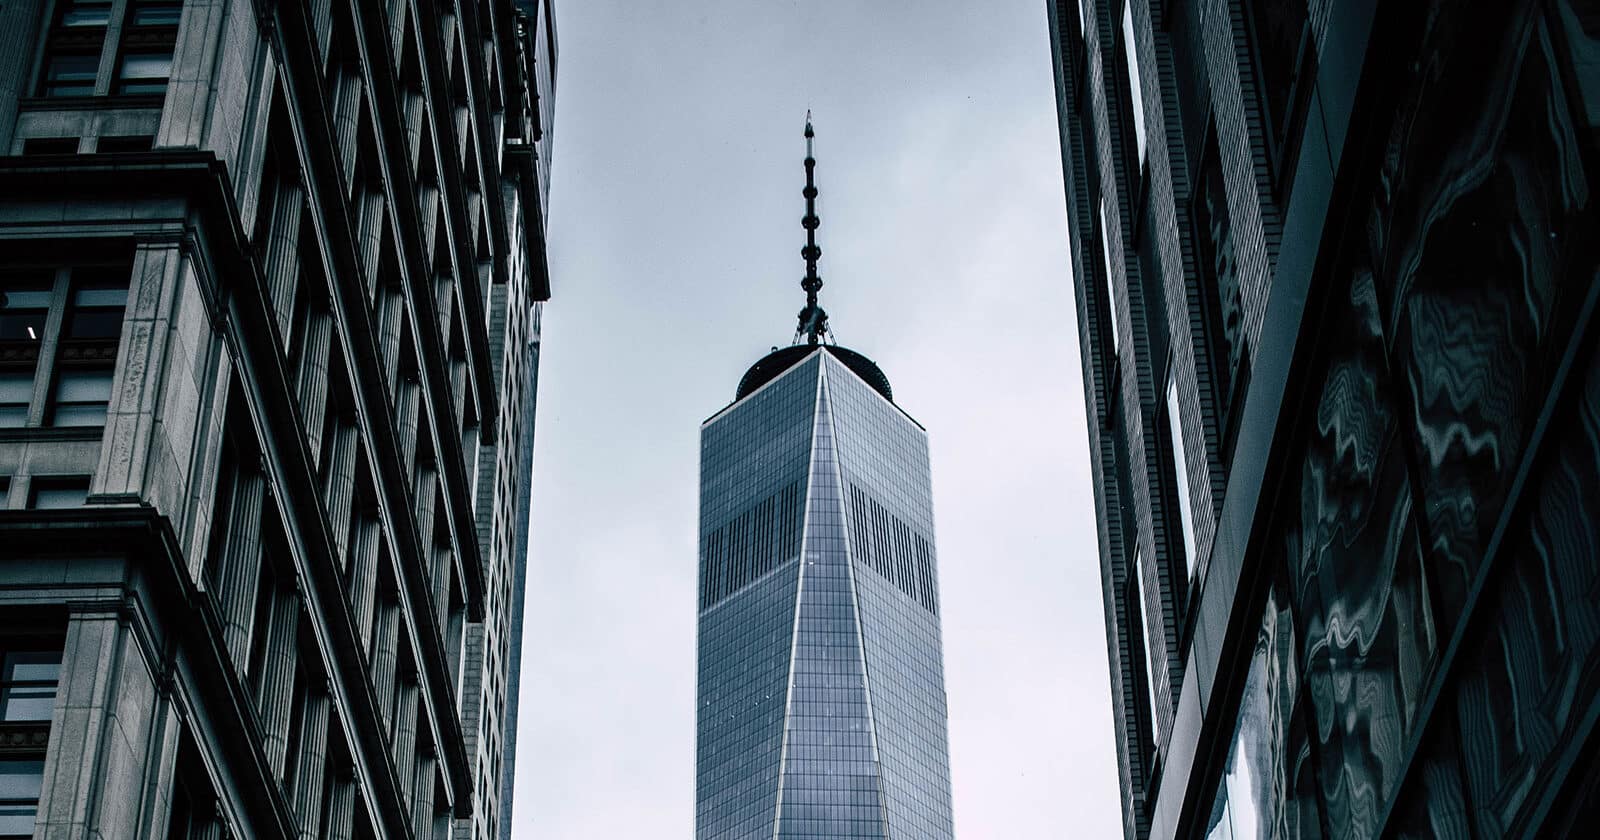 The One World Trade Center in between two buildings